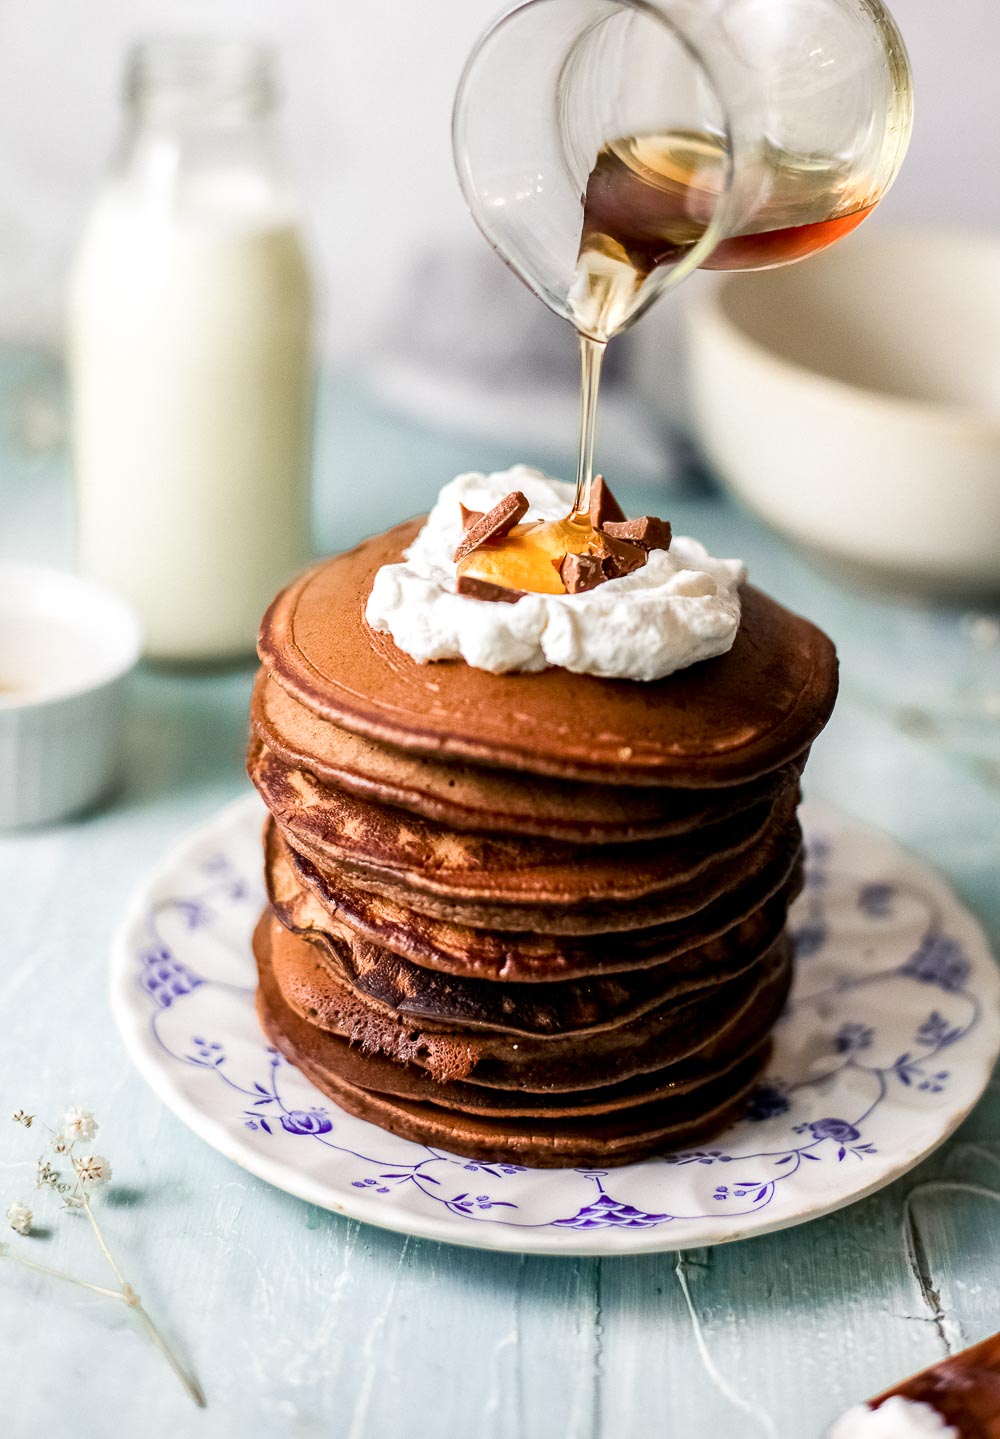 A super easy chocolate pancake recipe written with beginner cooks in mind! And don't forget to check more brunch ideas on the blog.